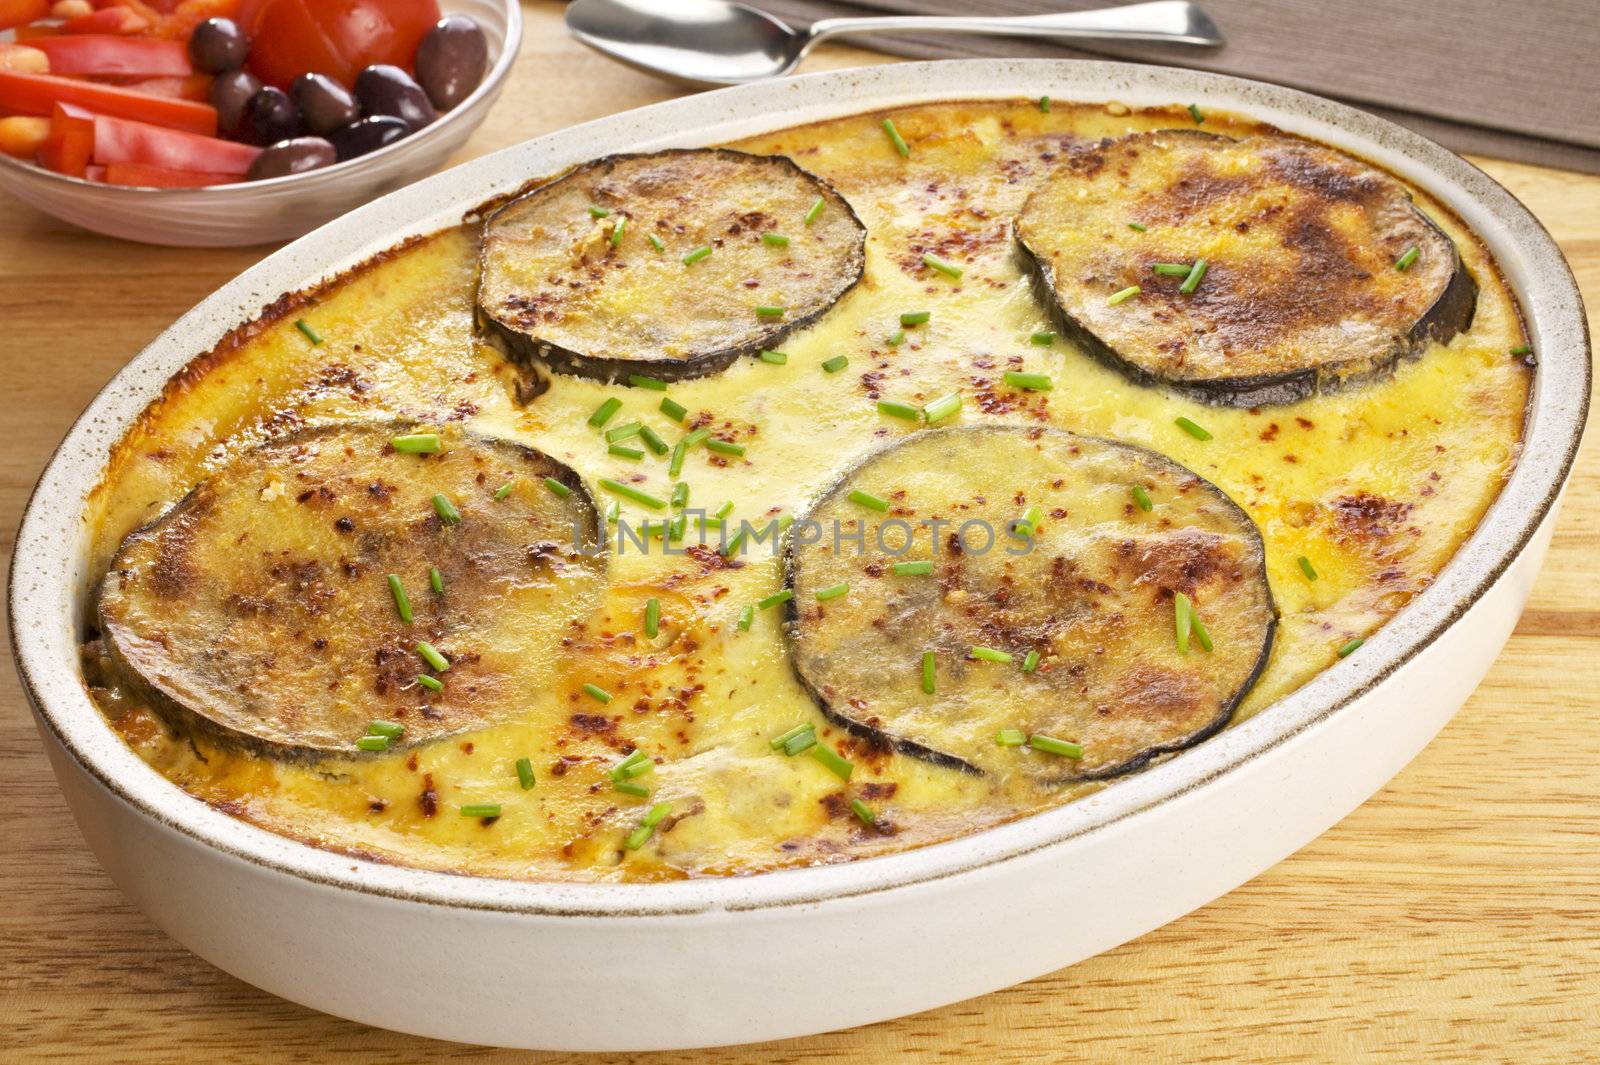 A dish of Moussaka, favourite Greek meal, tasty lamb mince in a sauce with olive oil, garlic, tomato, onion and cinnamon, layered with aubergine and potato, and topped with cheesy, eggy, bechamel sauce. Typical of the Mediterranean diet.